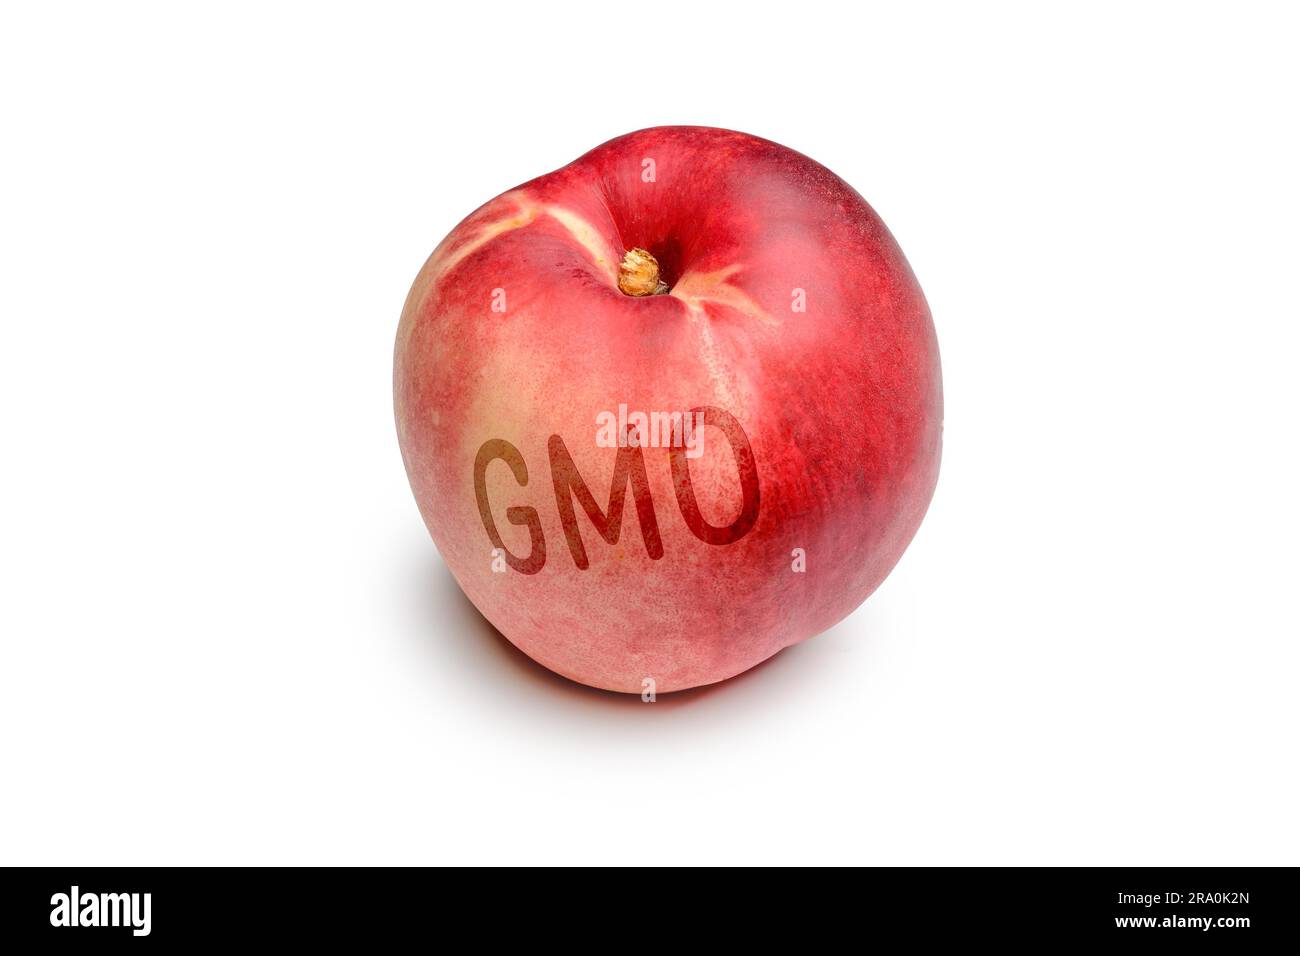 A nectarine contaminated by the use of GMO technology Stock Photo